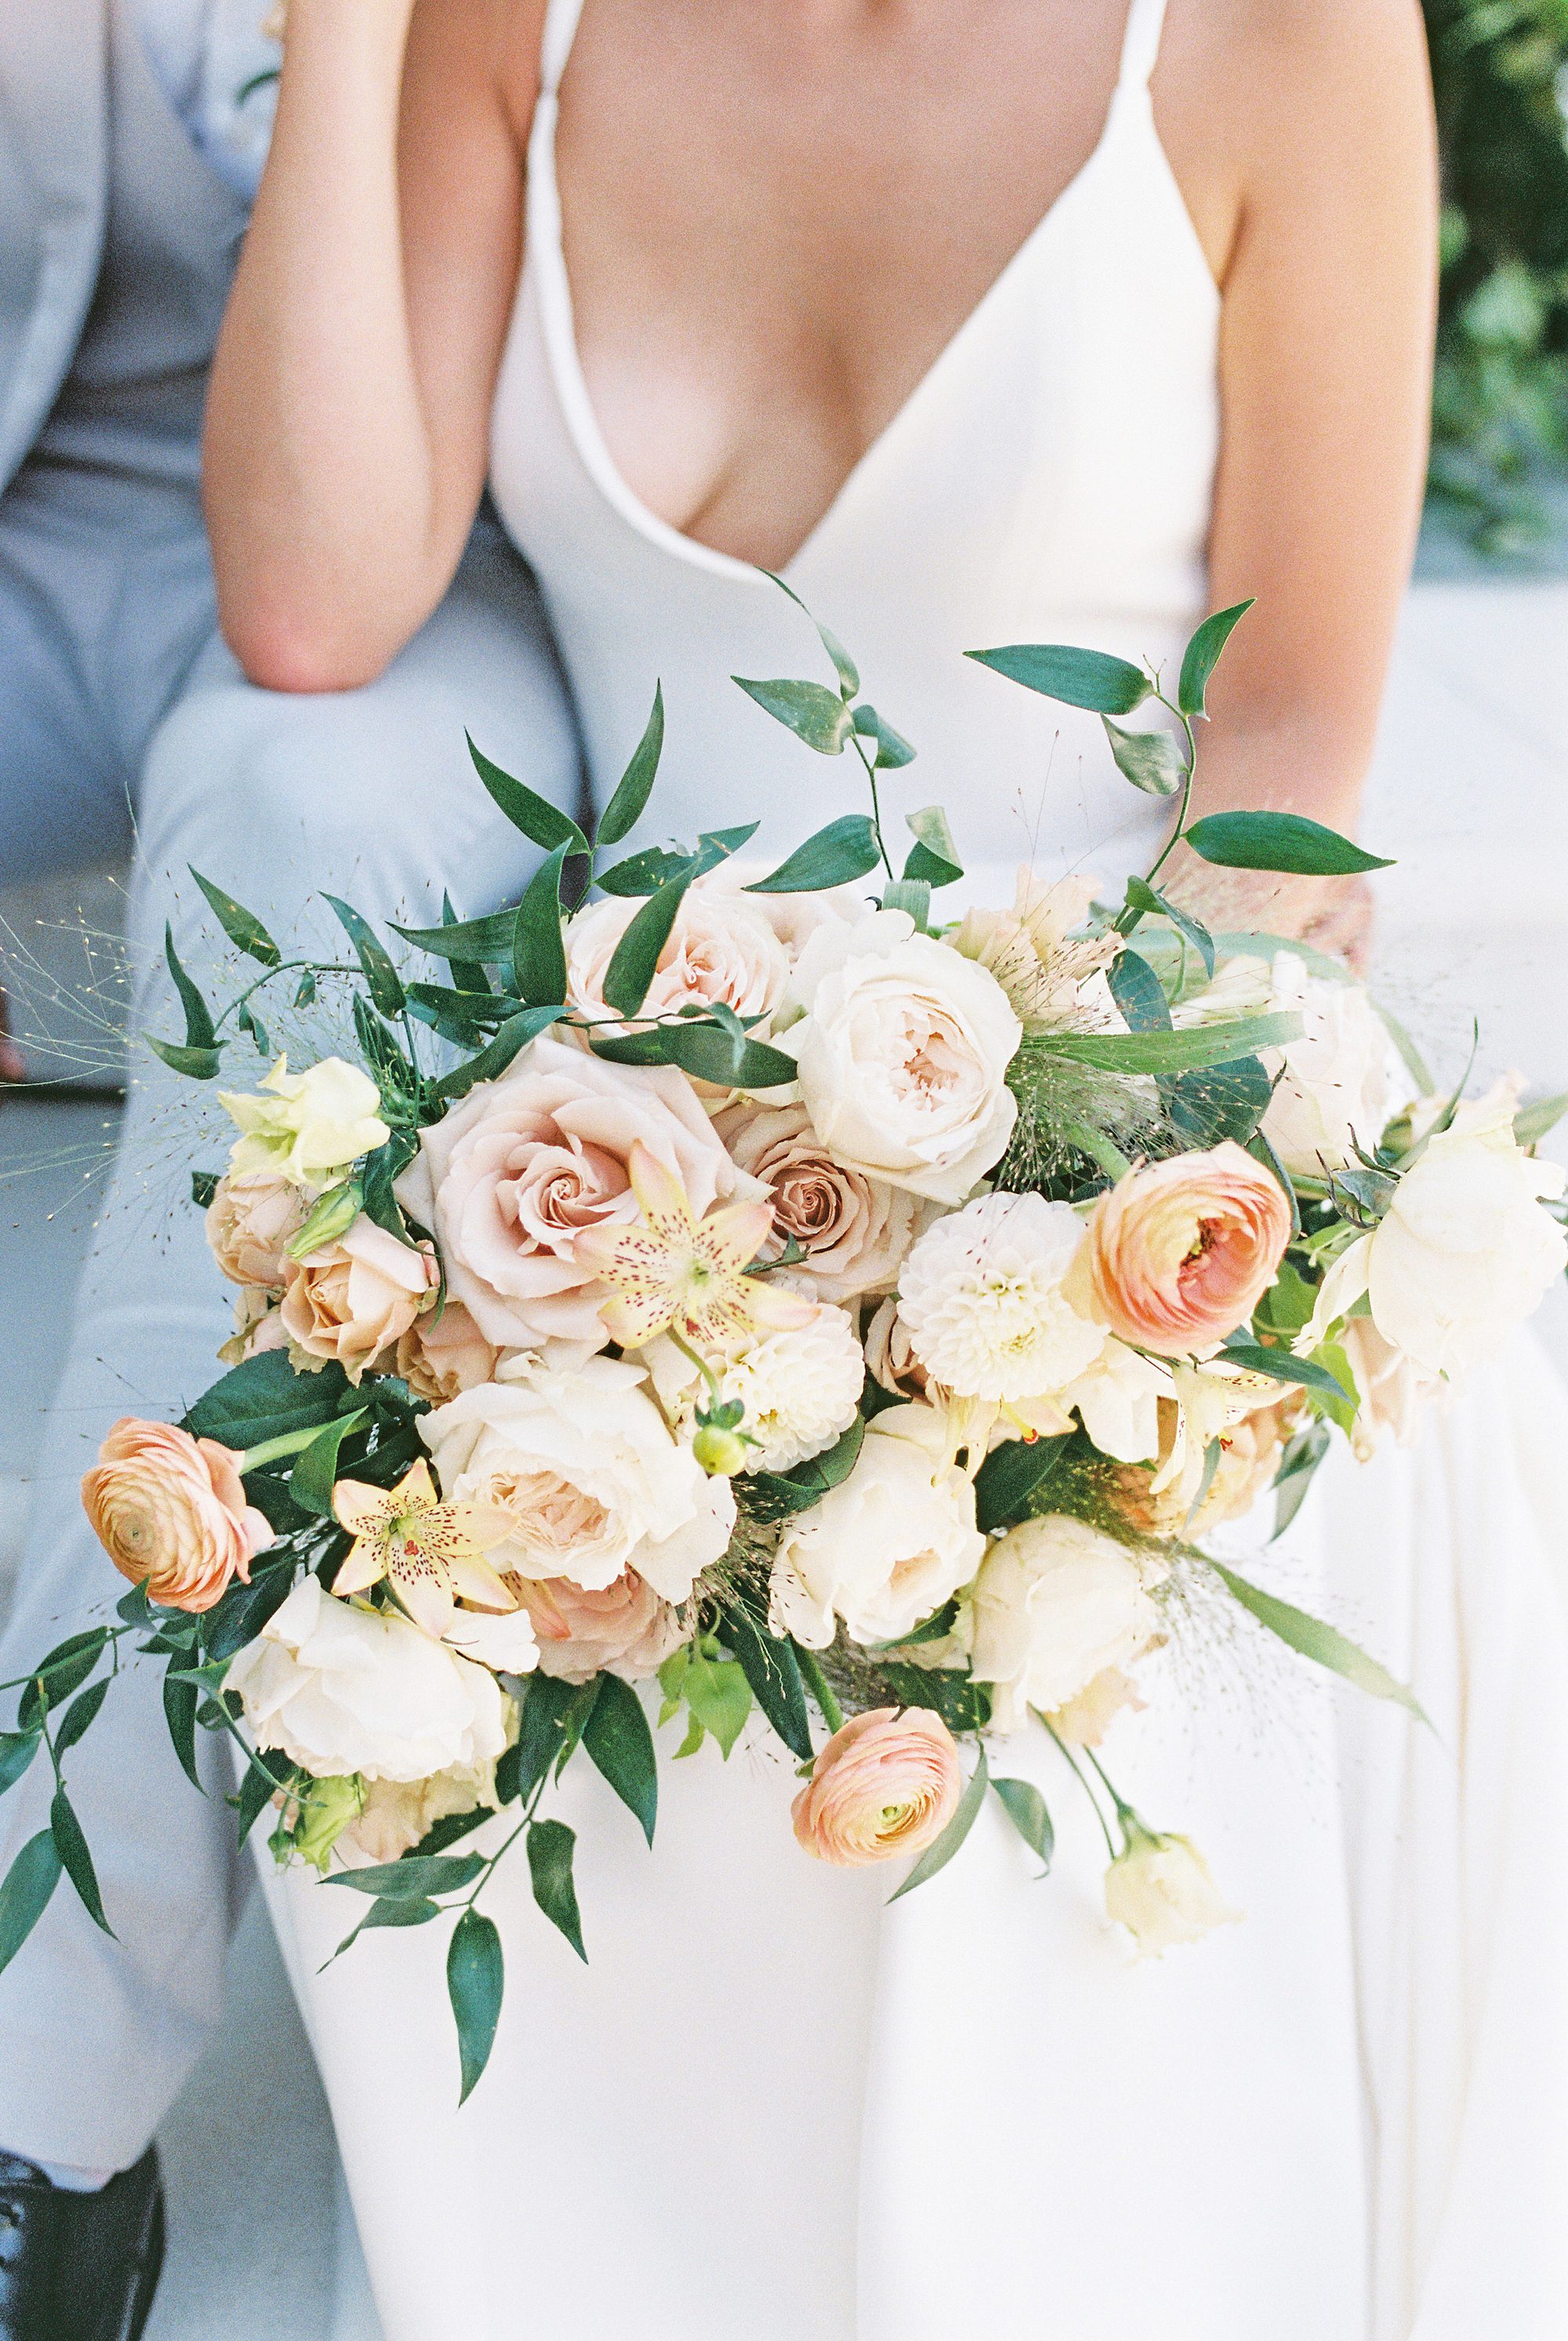 elegant, light and airy wedding bouquet